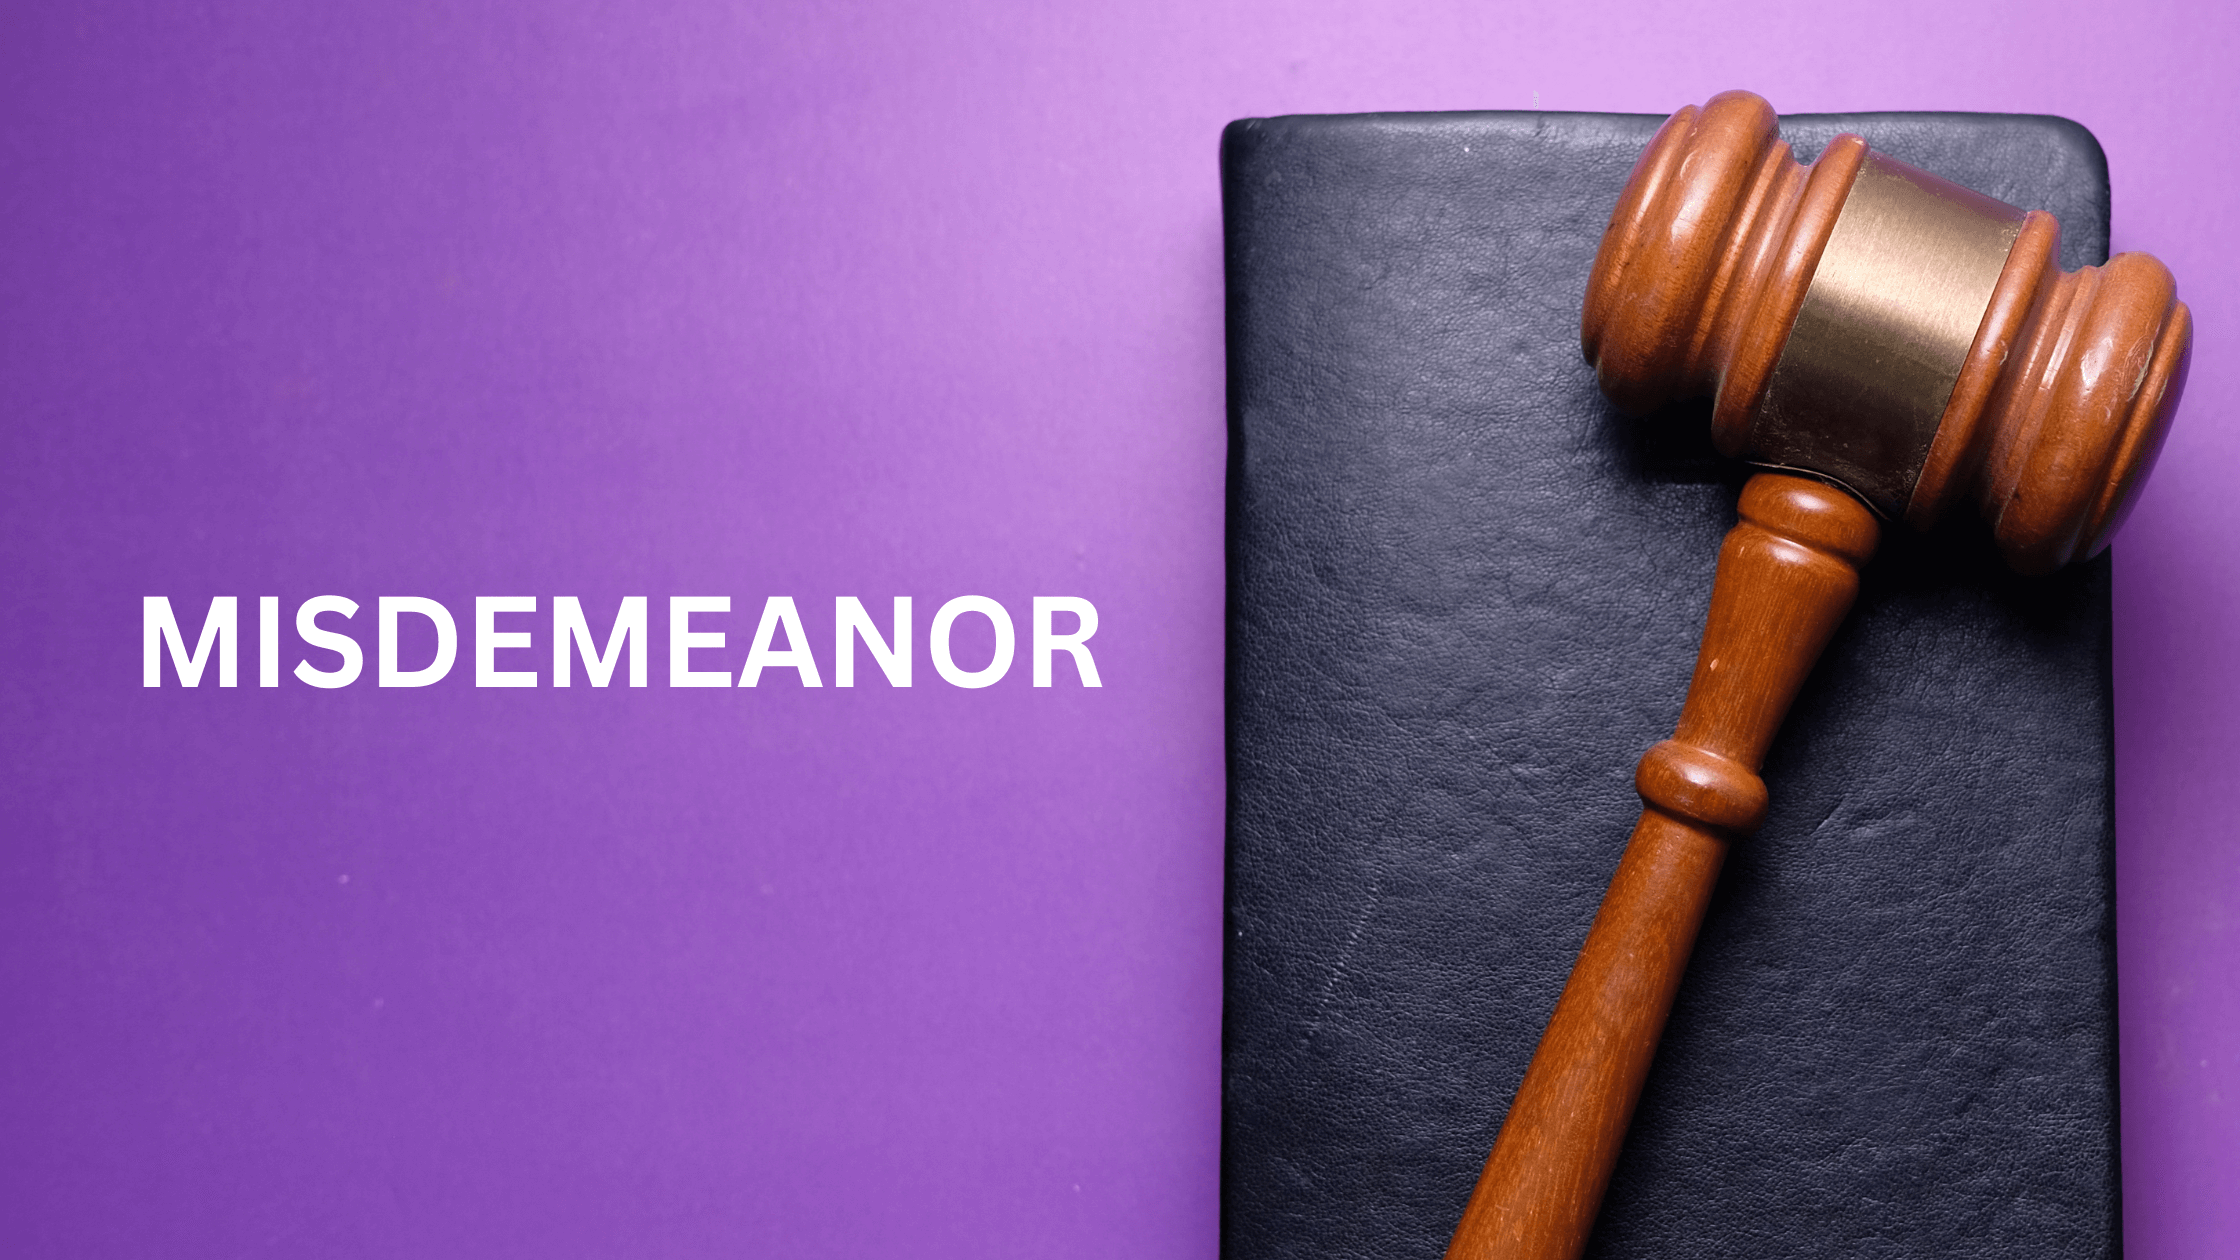 Legal gavel on book, purple background, MISDEMEANOR in white text.